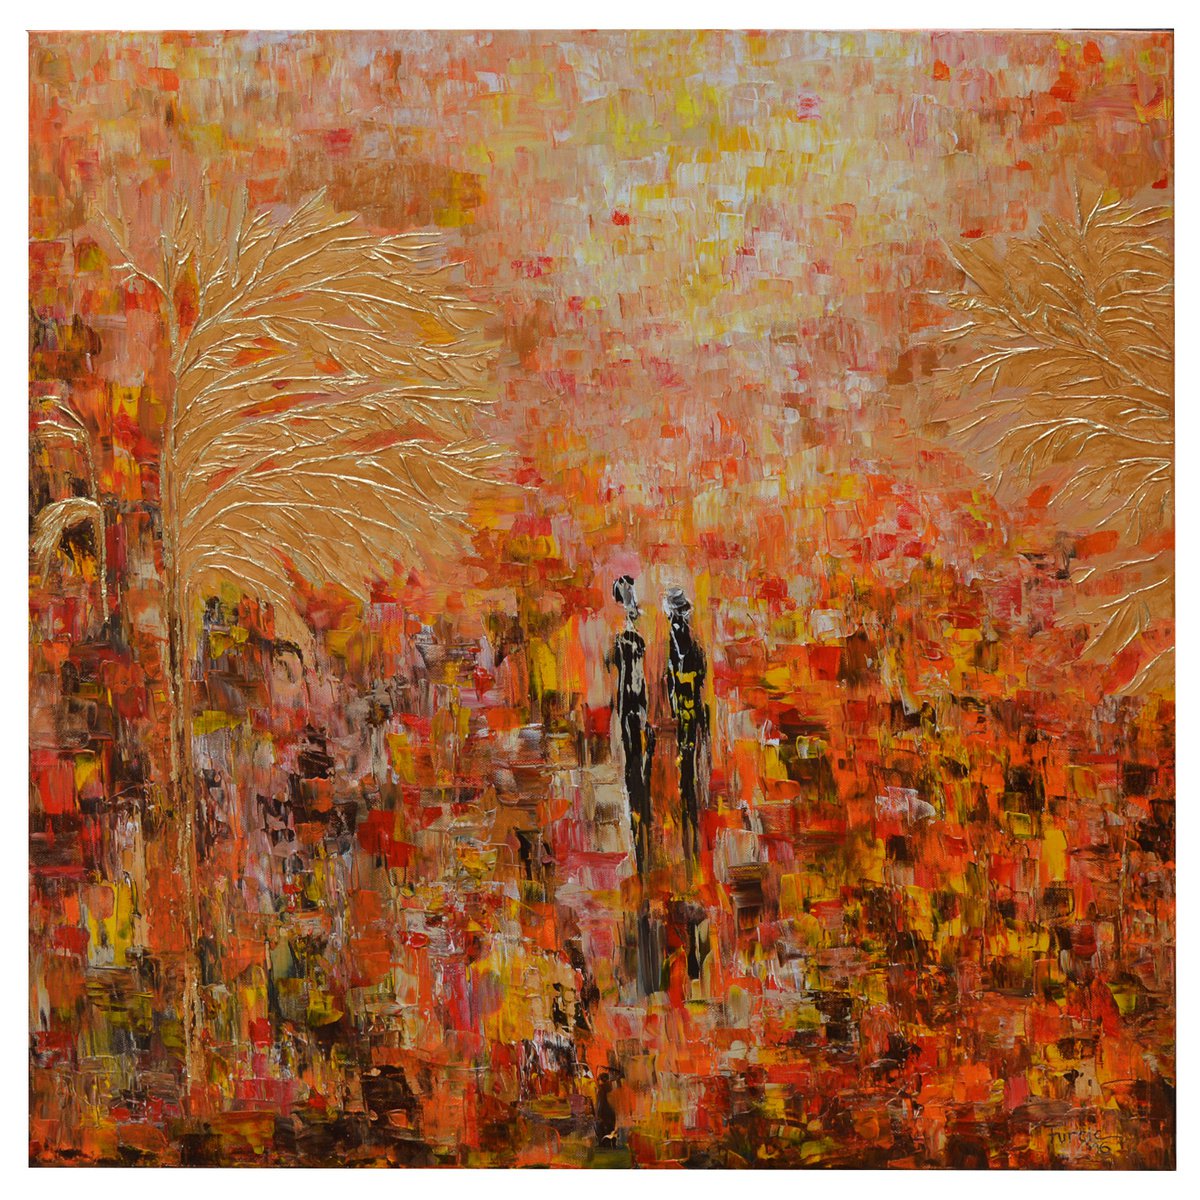 TREE WITH GOLDEN FLOWERS - ABSTRACT THICK IMPASTO SQUARE FORMAT PAINTING by VANADA ABSTRACT ART